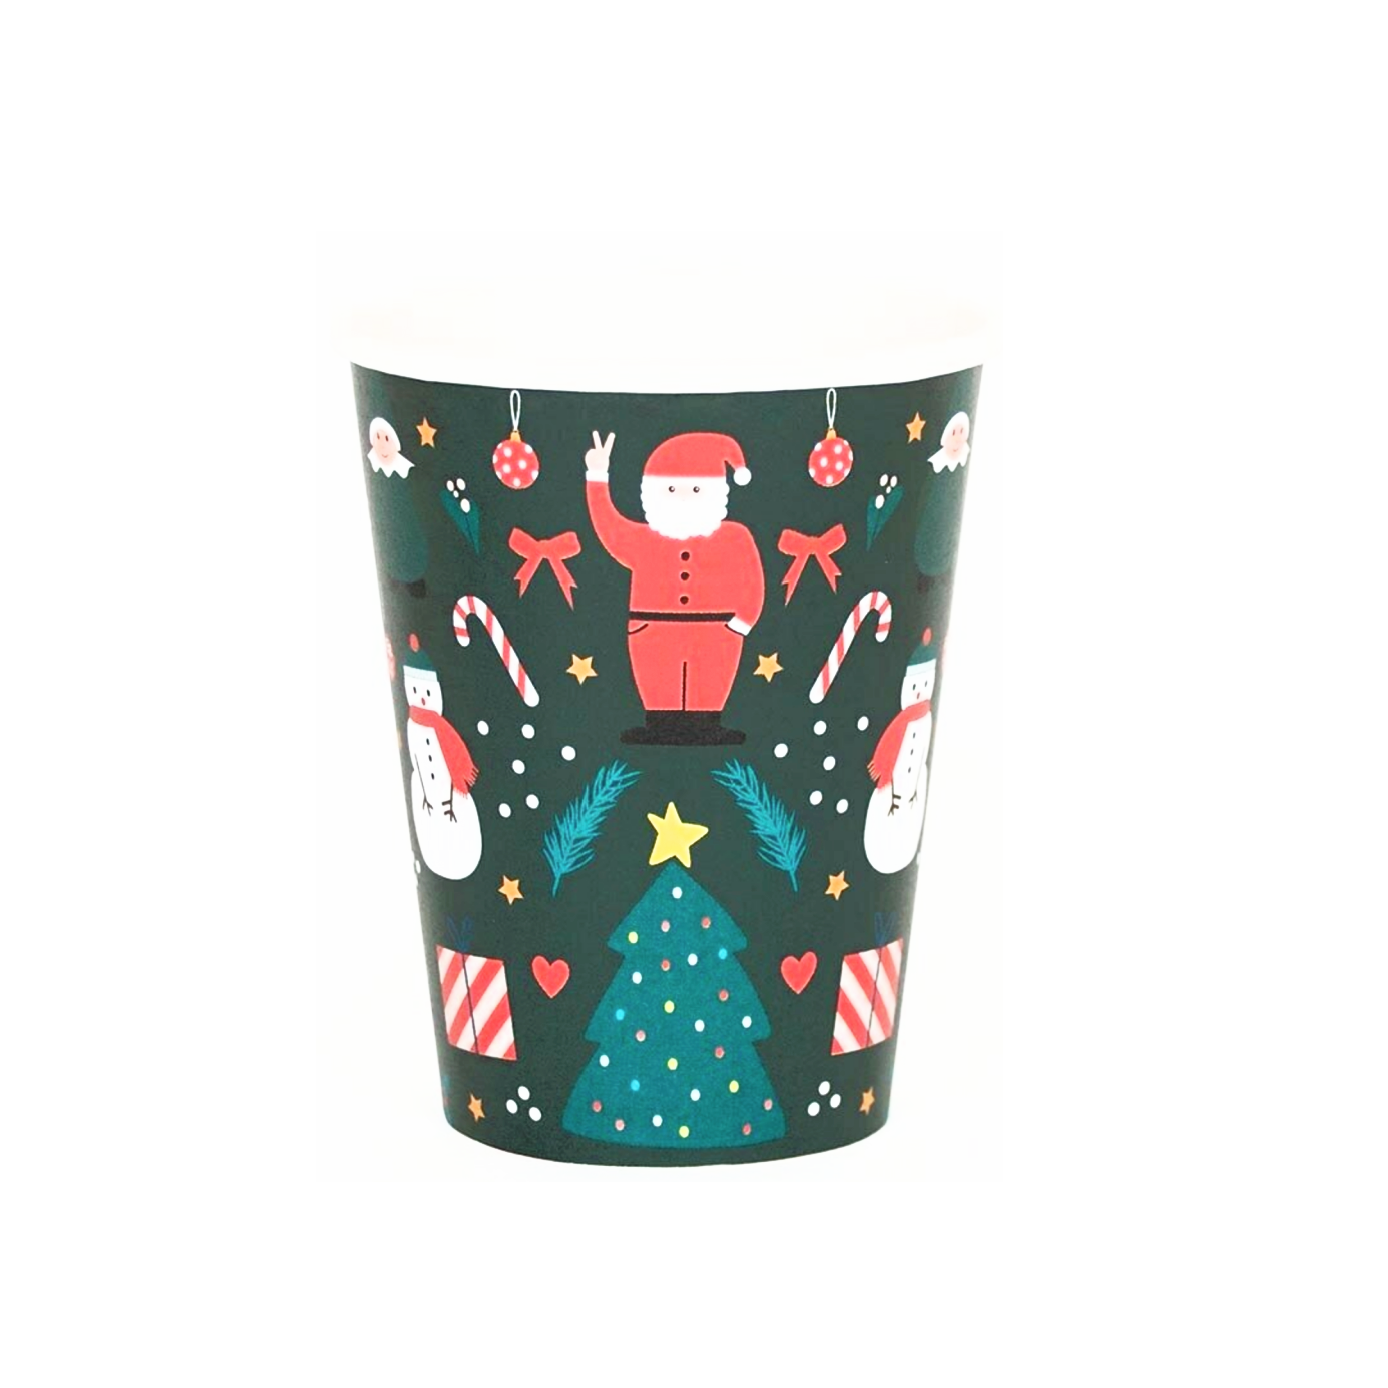 Reindeer Party Cups, Nutcracker, Elf, Set of Christmas Party Cups